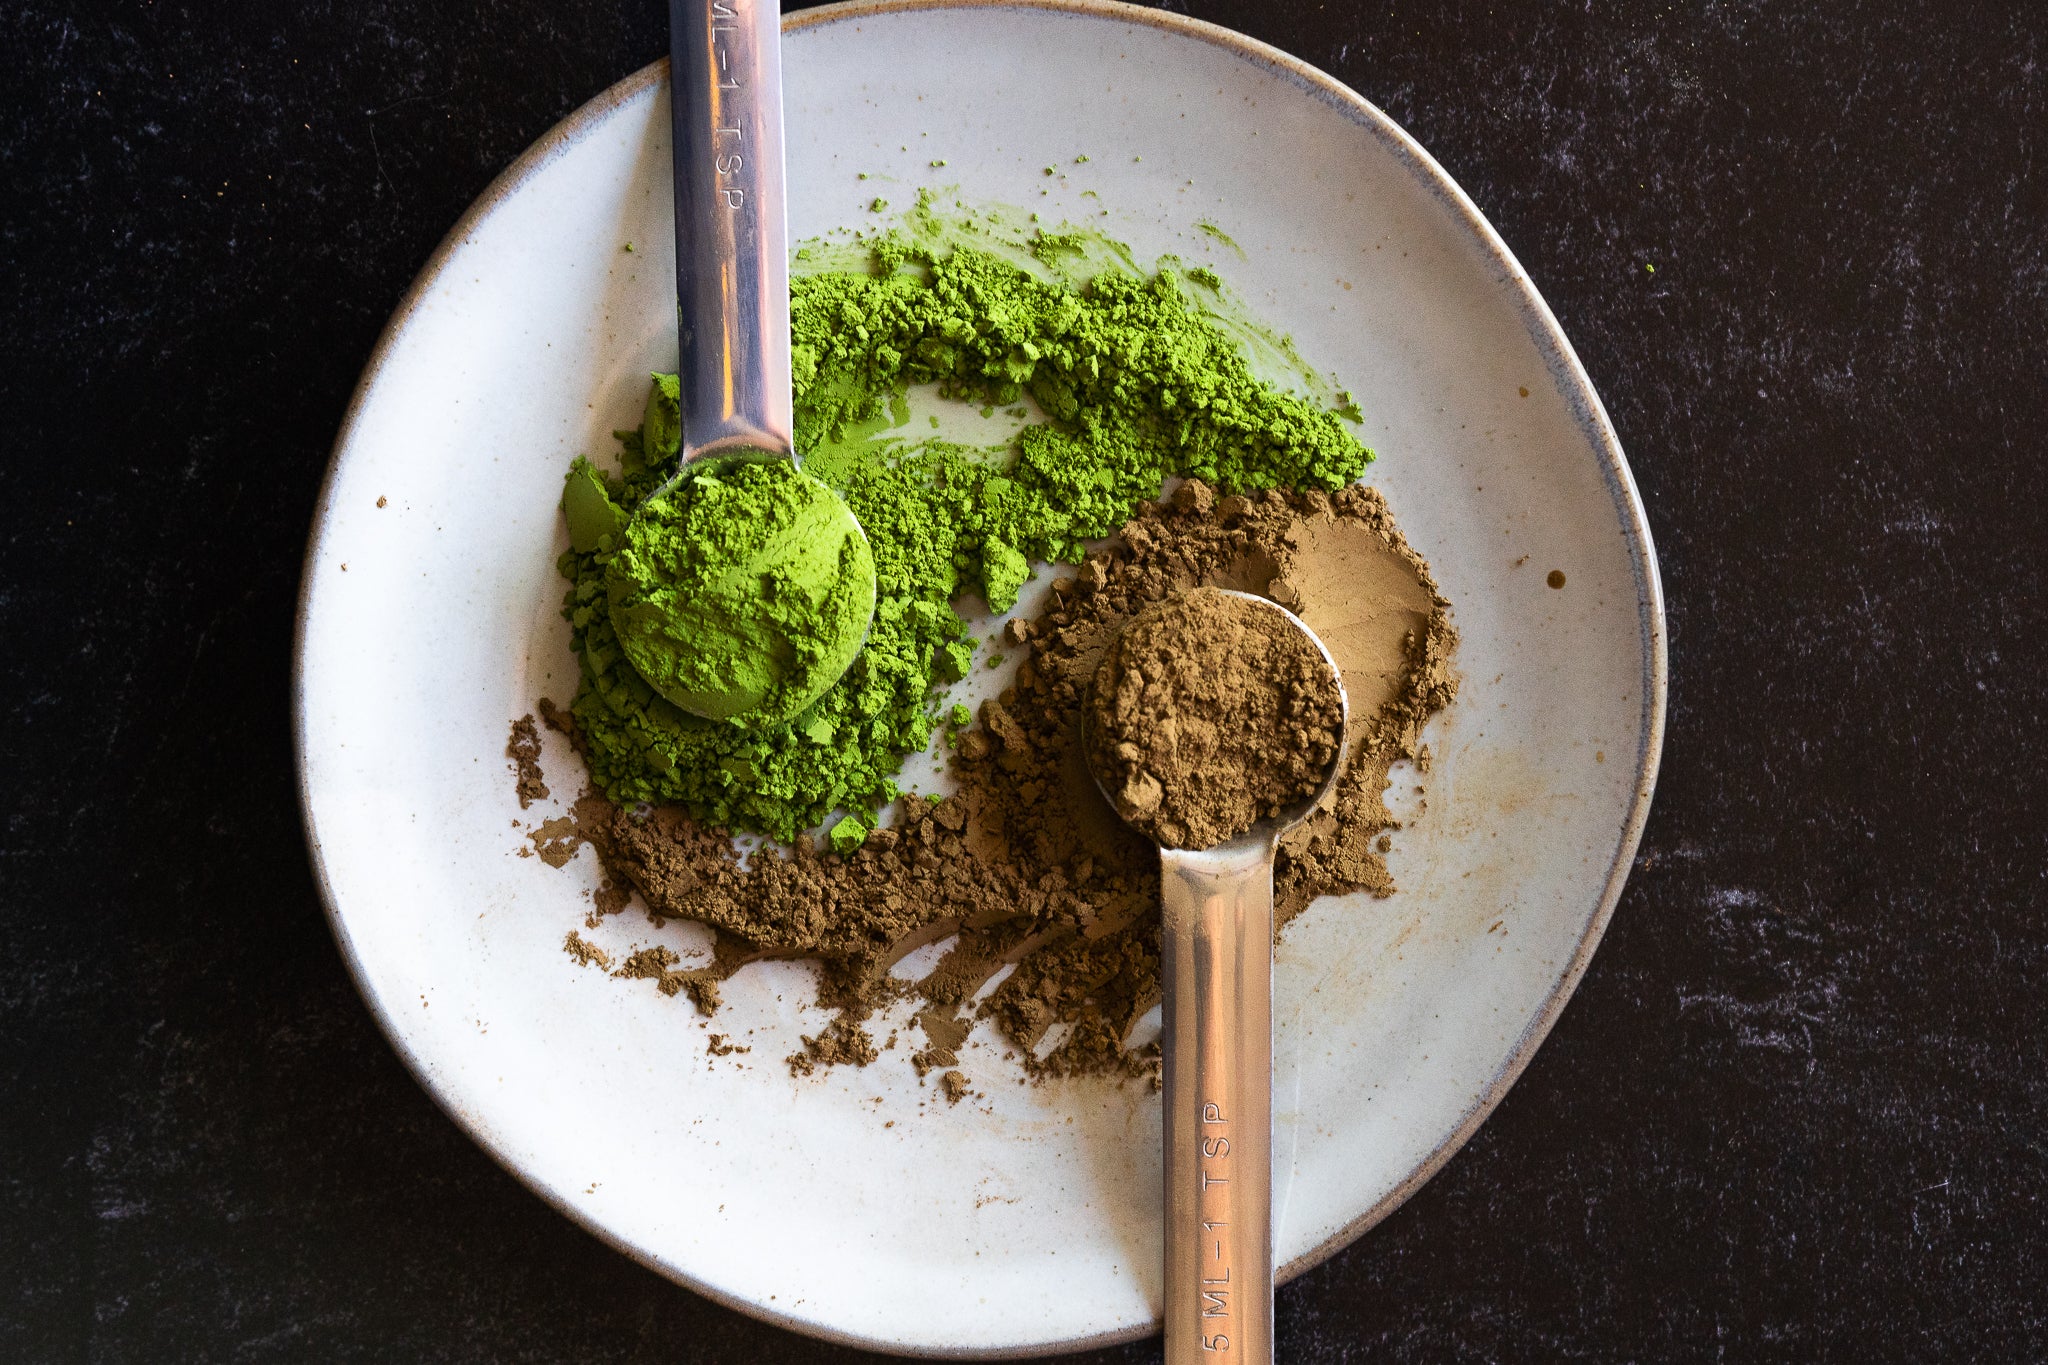 Matcha and Hojicha powder mixed on a plate with tea spoons